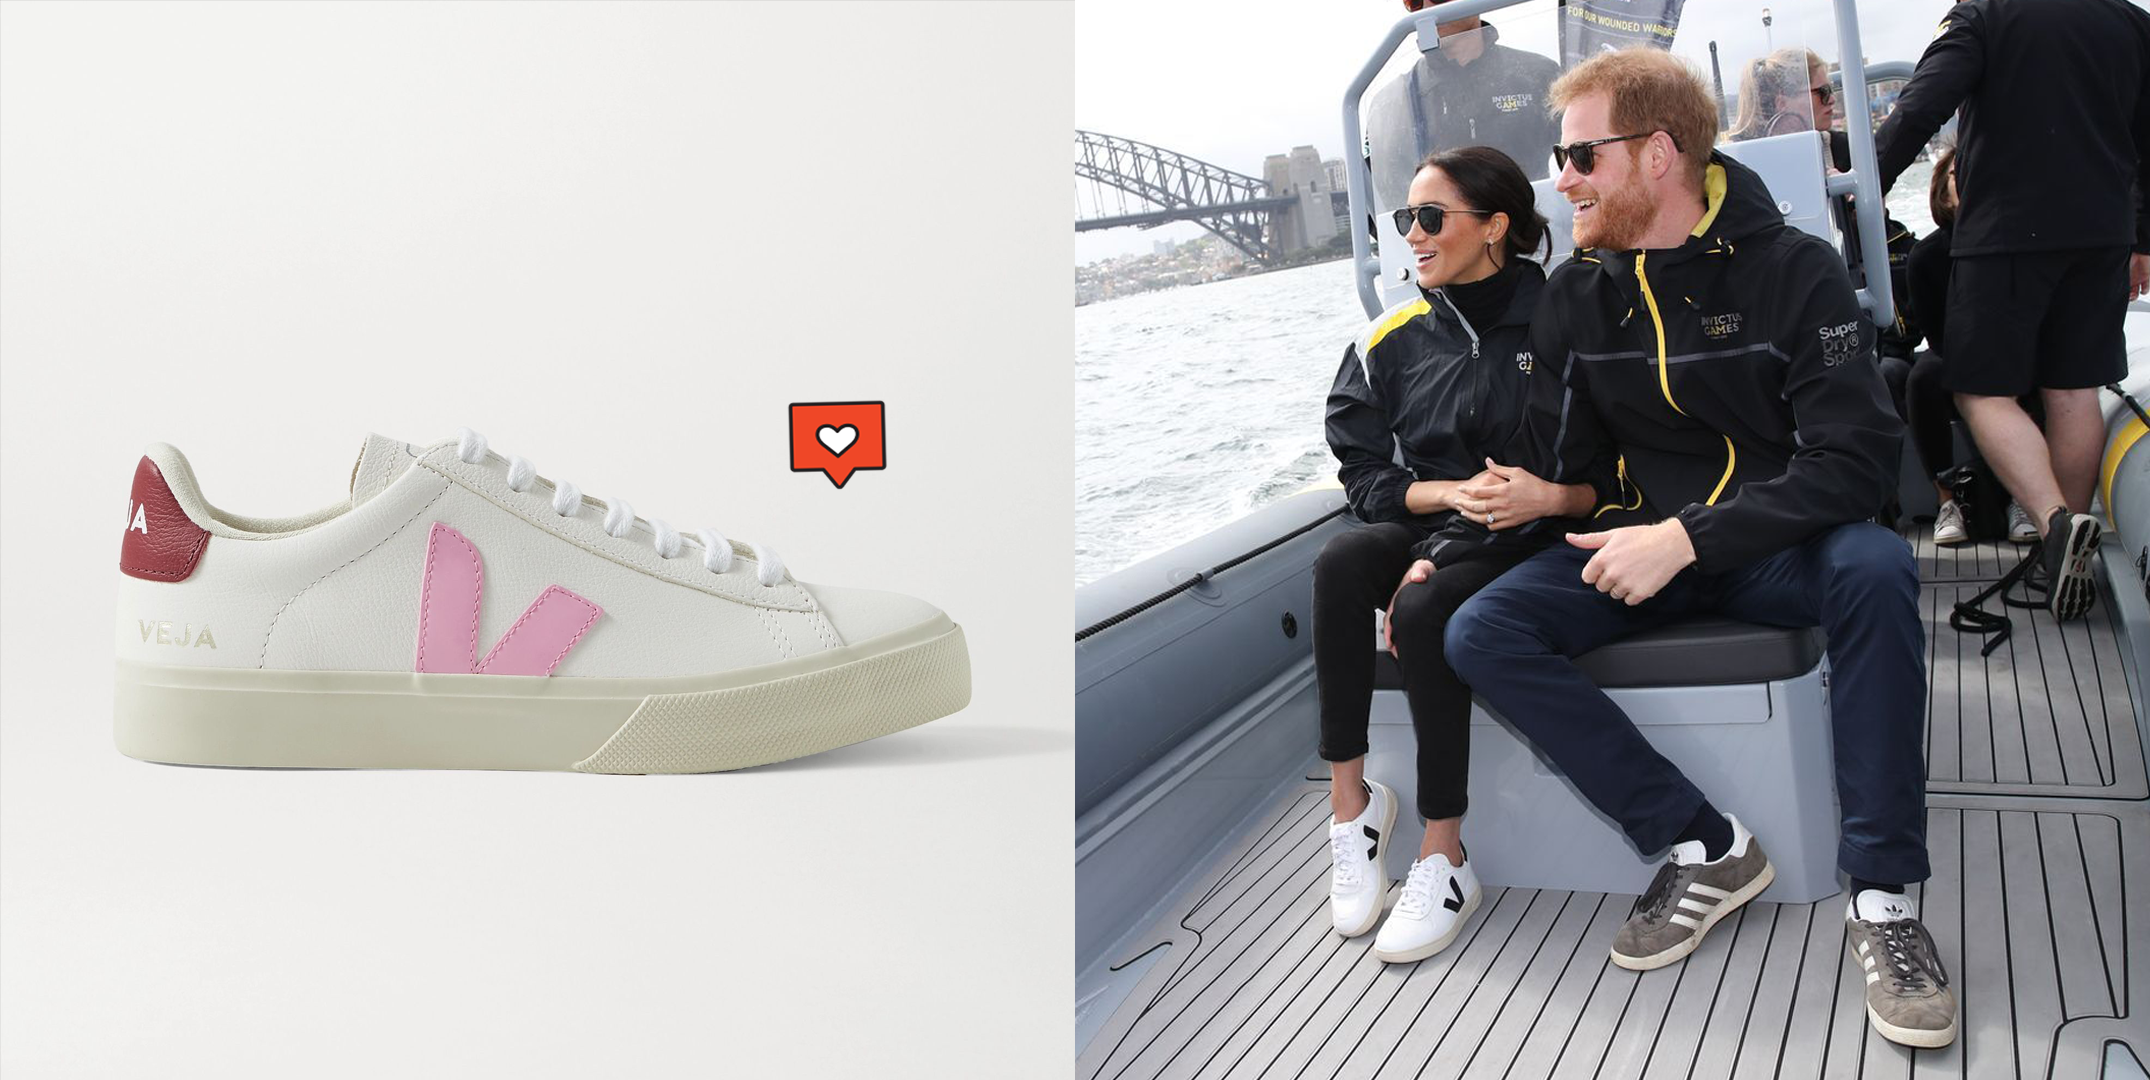 Meghan Markle's Veja Sneakers Are Sale — Where to Buy Meghan Markle's Exact Sneakers